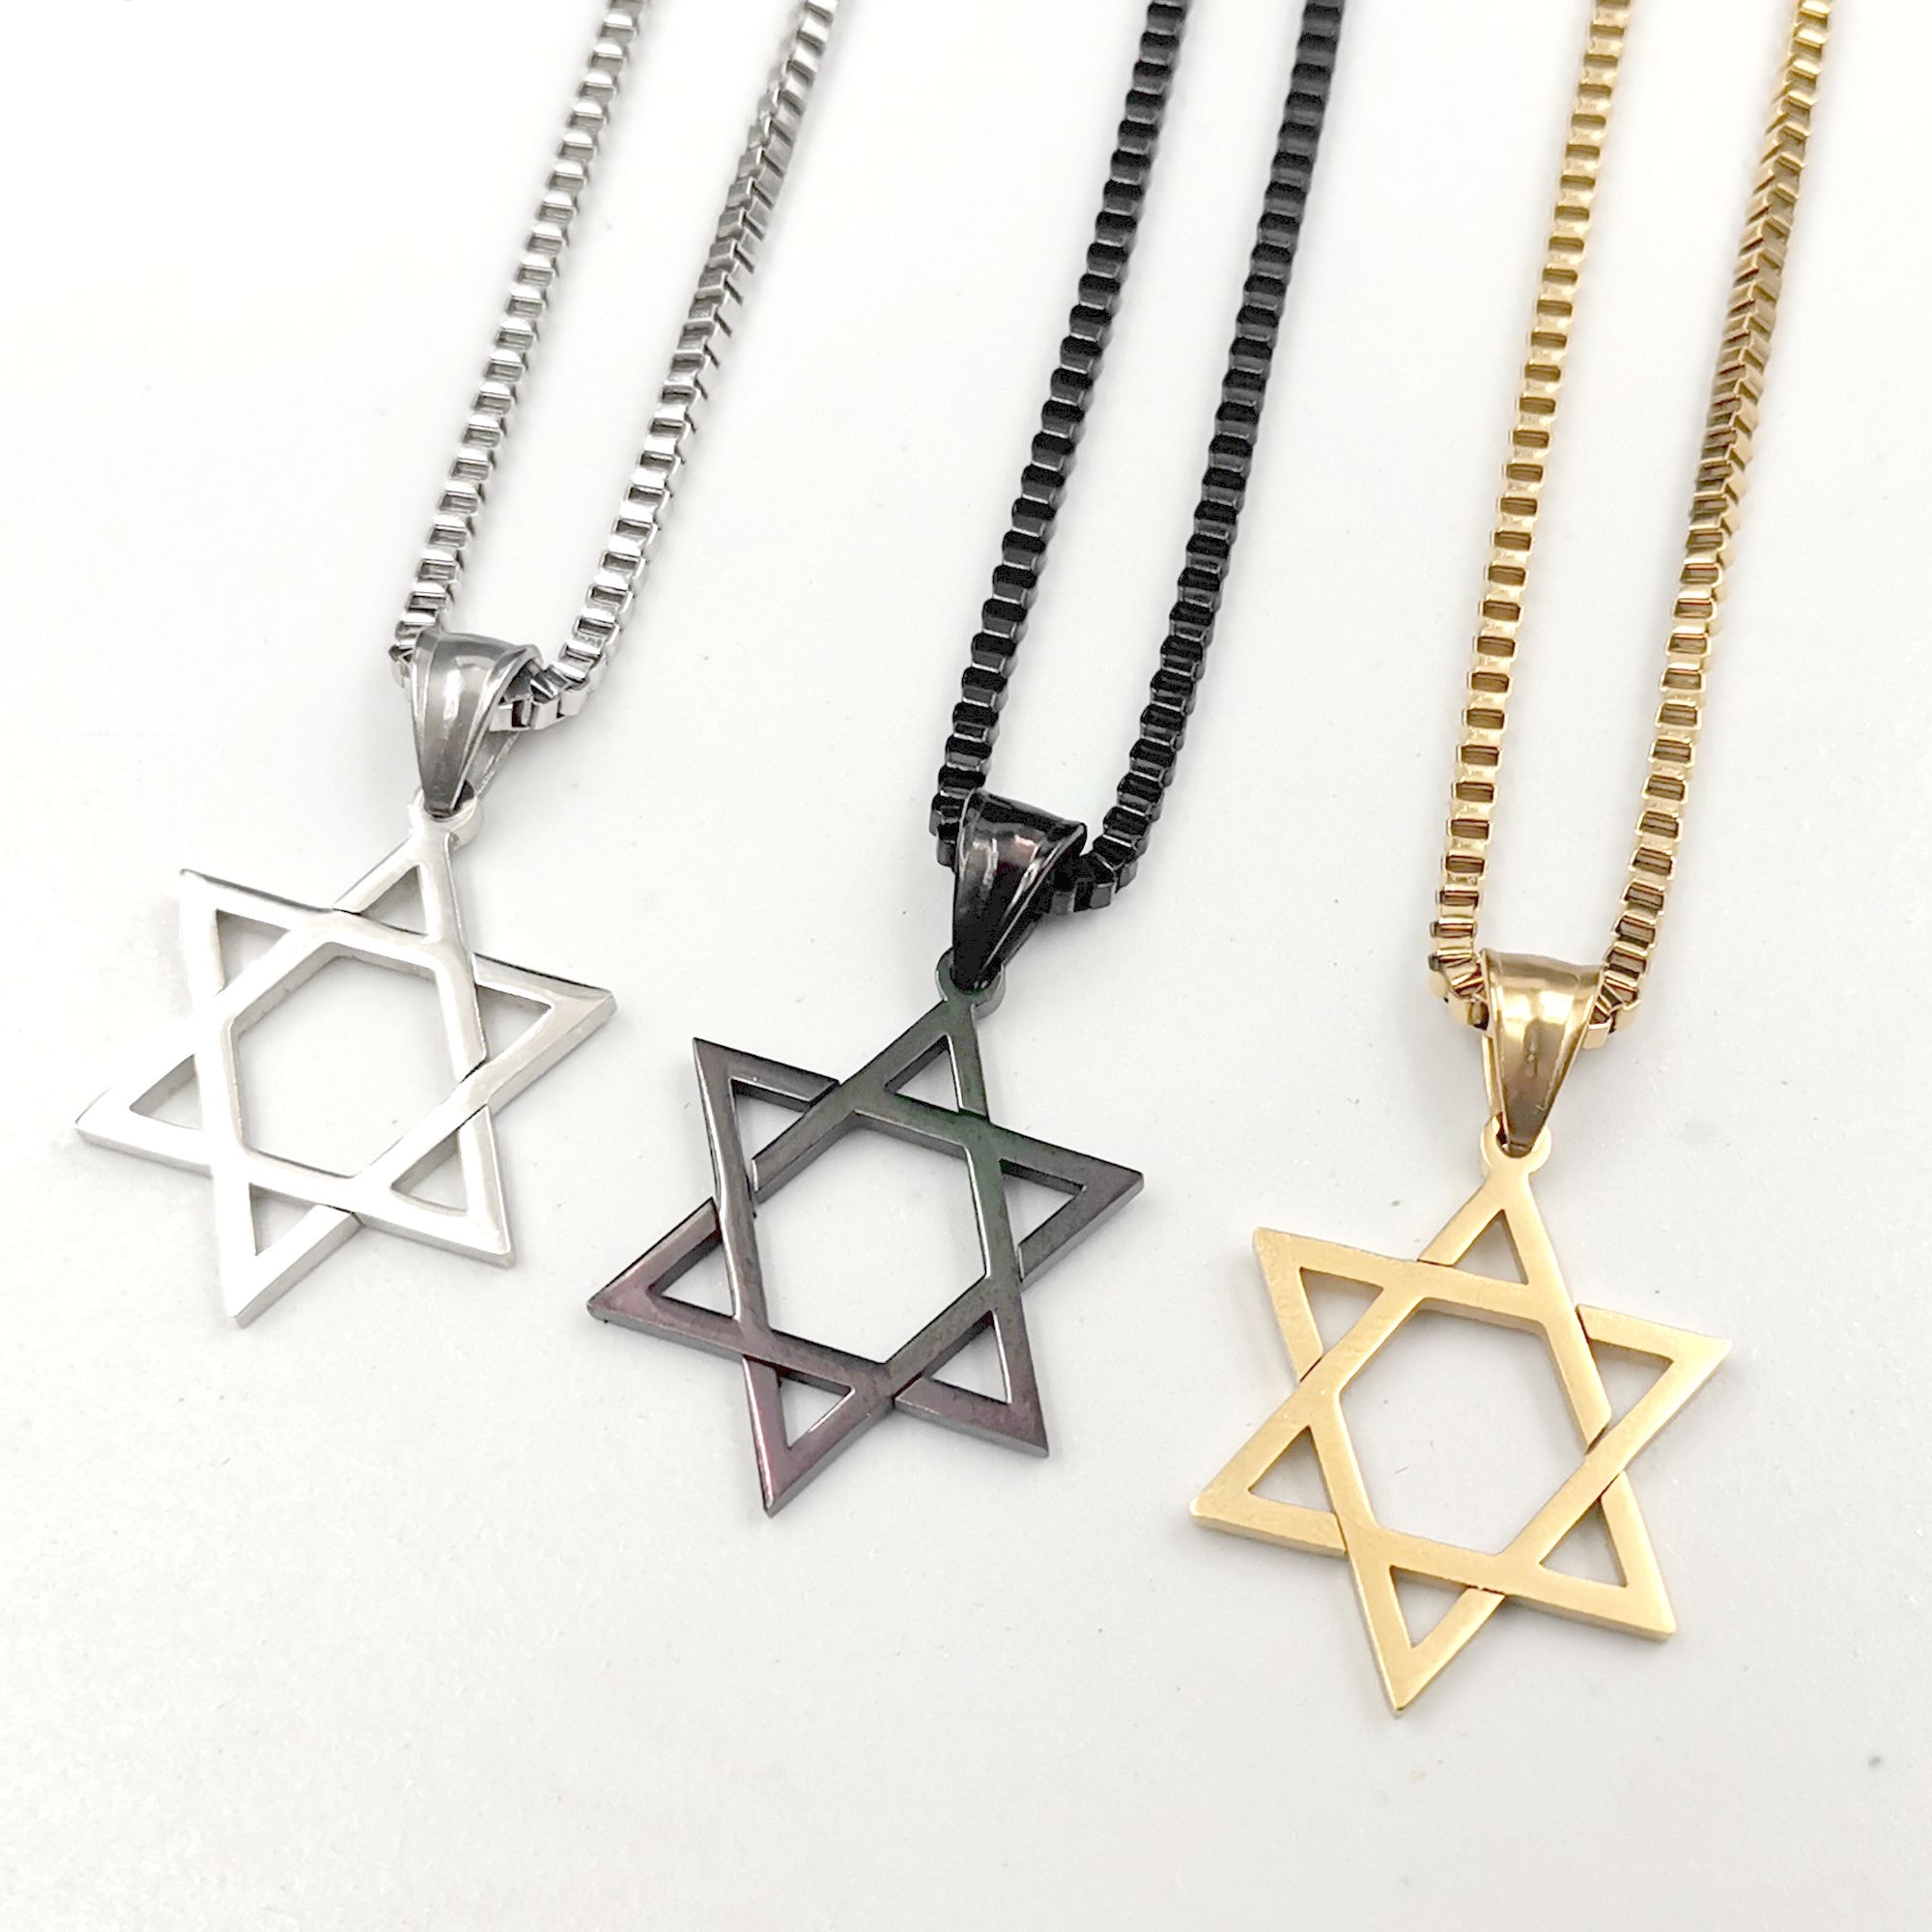 

Israel Magen David Necklace Star of David Pendant Jewish Religious Jewelry Stainless Steel Boys Birthday Gifts for Son Grandson Box Chain 2.4mm 30inch